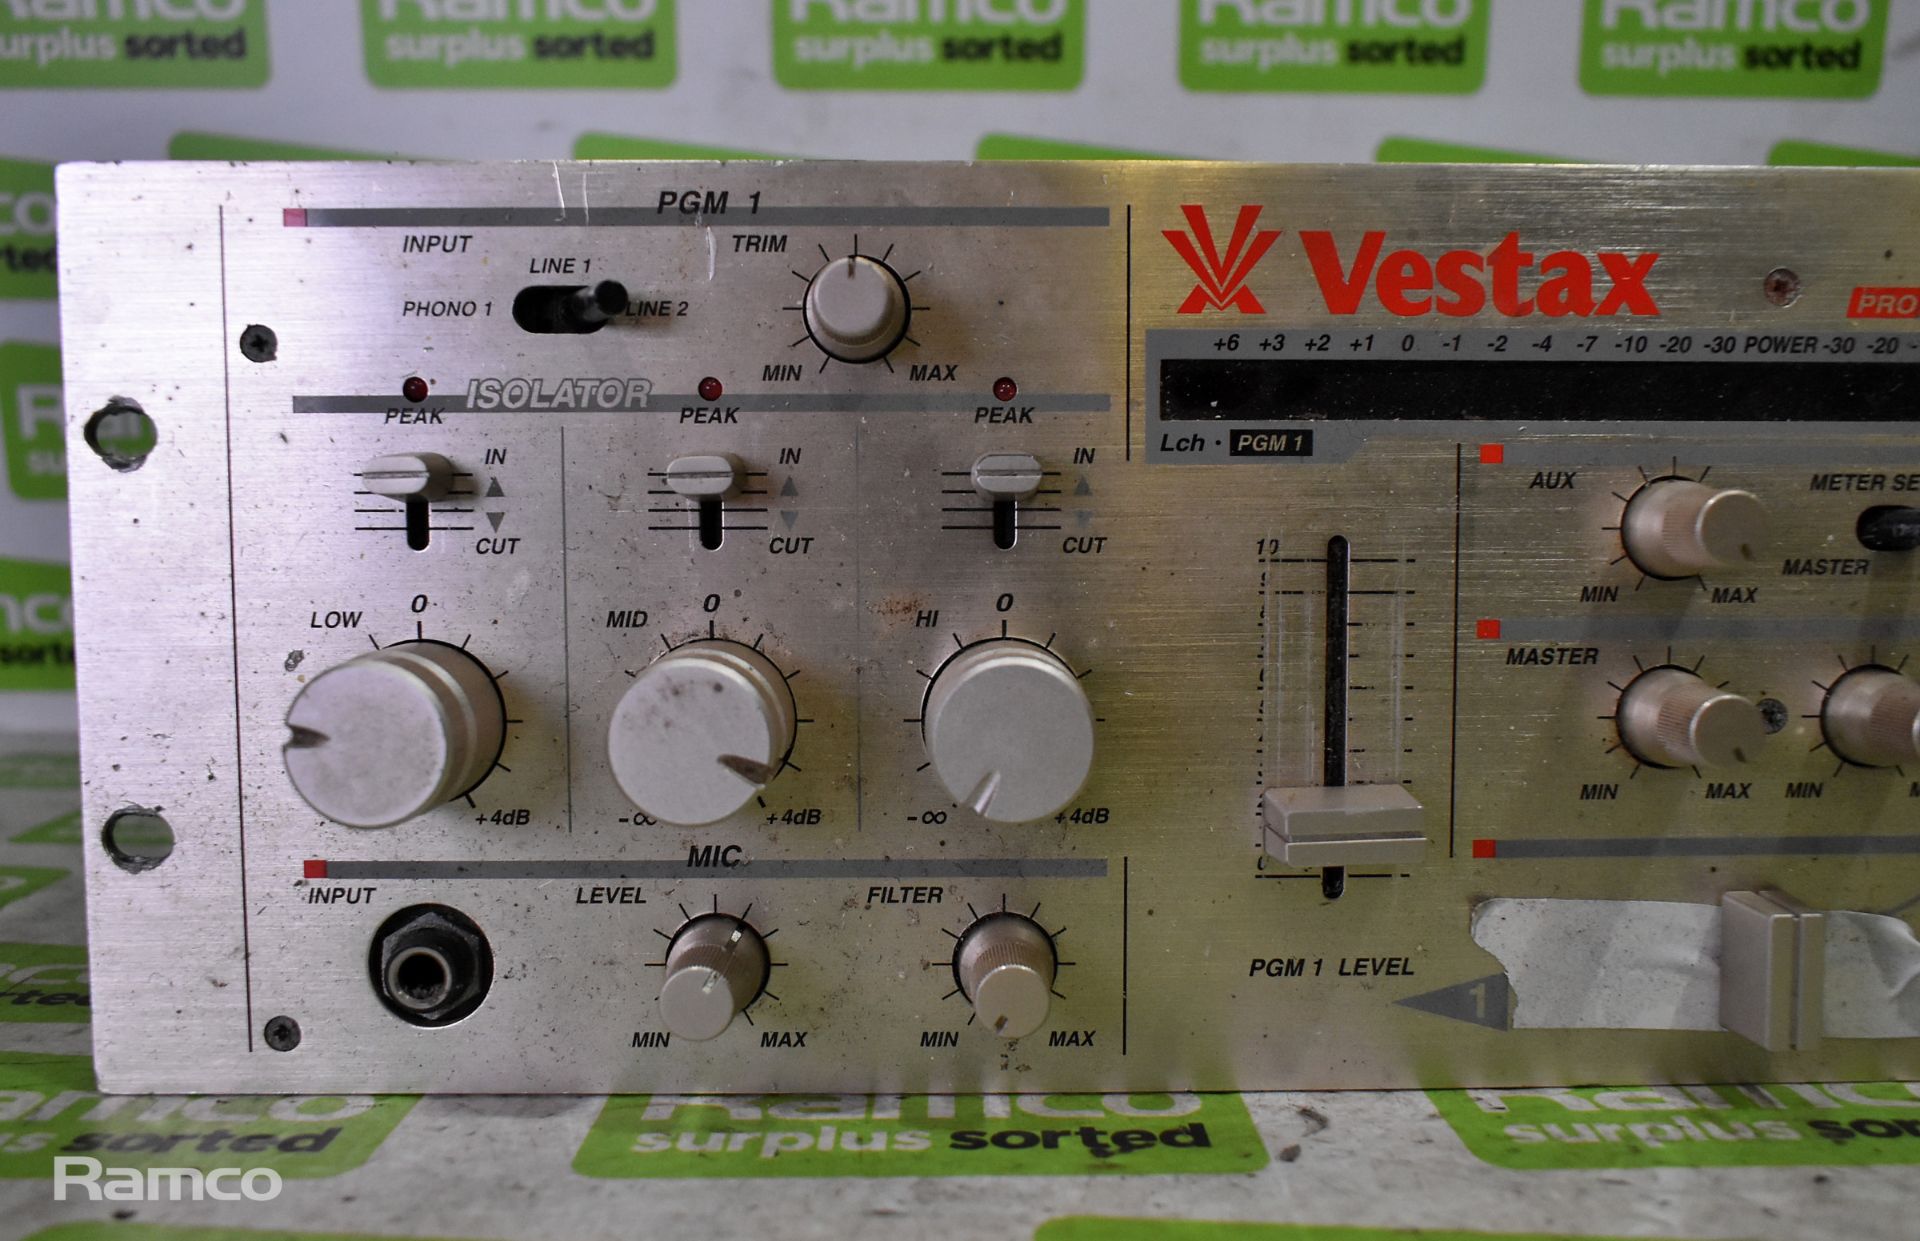 Vestax PMC-250 professional mixing controller with PSU - L 480 x W 130 x H 130mm - Image 3 of 4